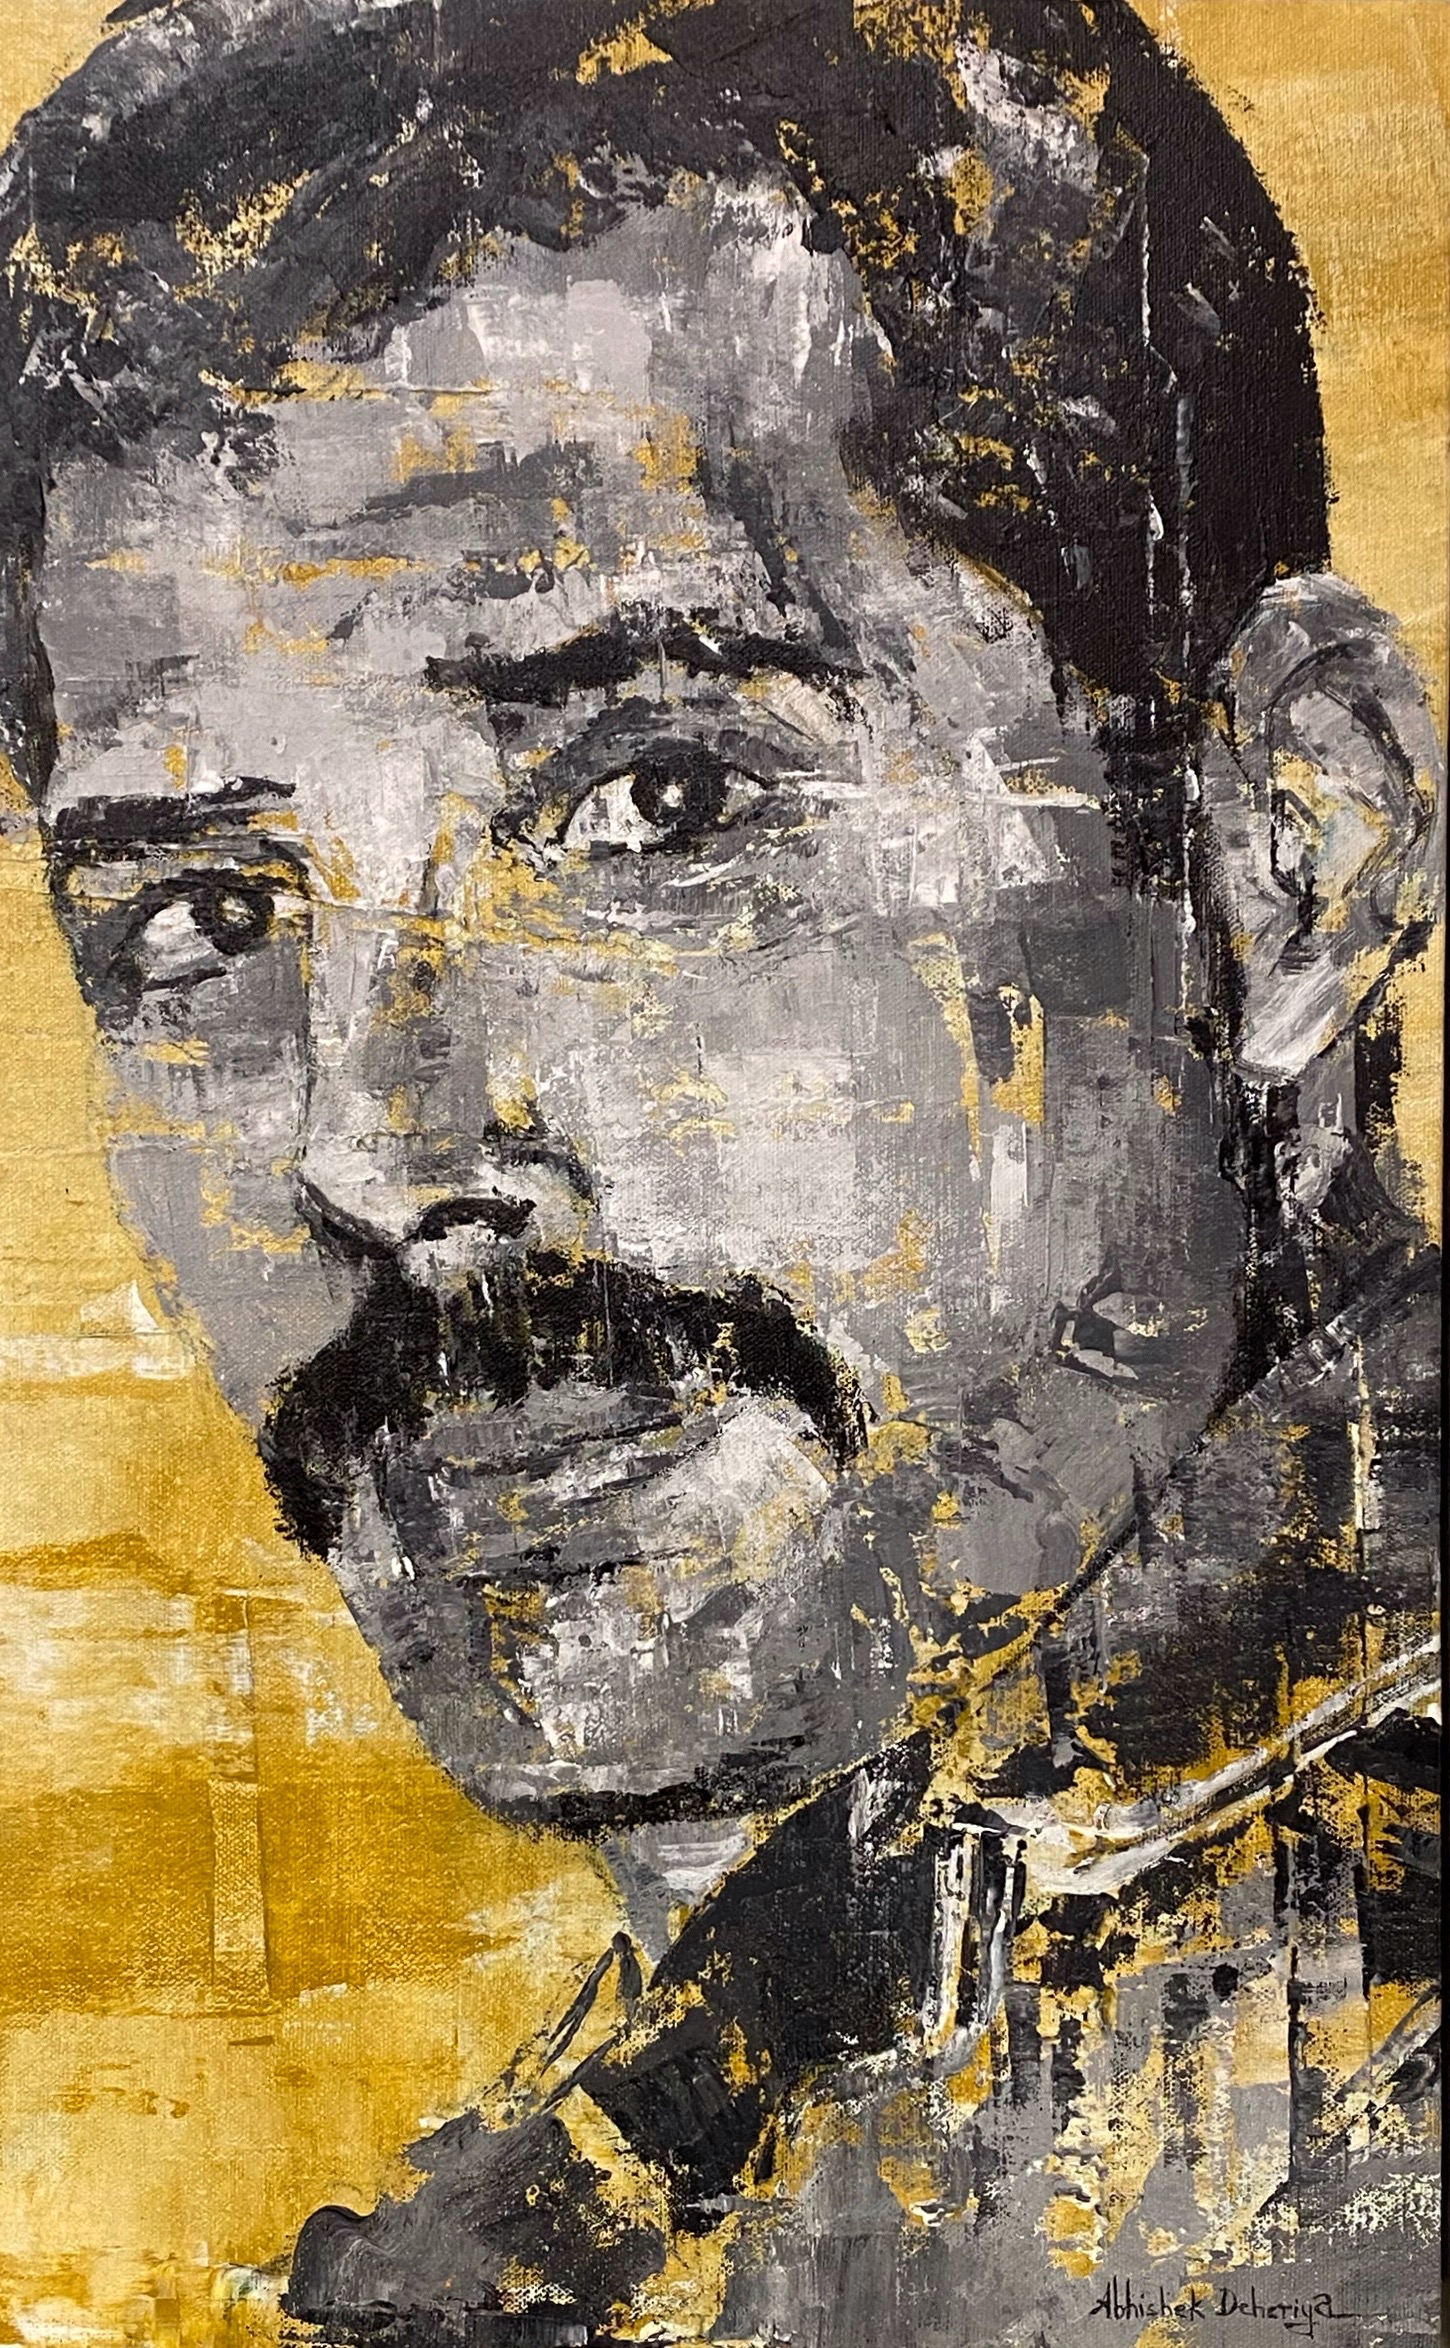 Acrylic painting of Freddie Mercury by Abhishek Deheriya. The painting showcases a striking and energetic portrait of the legendary singer, Freddie Mercury. With skillful brushwork and a vibrant color palette, the artist has captured Freddie Mercury's charismatic stage presence and his iconic mustache, paying homage to his legendary contributions to music and performance